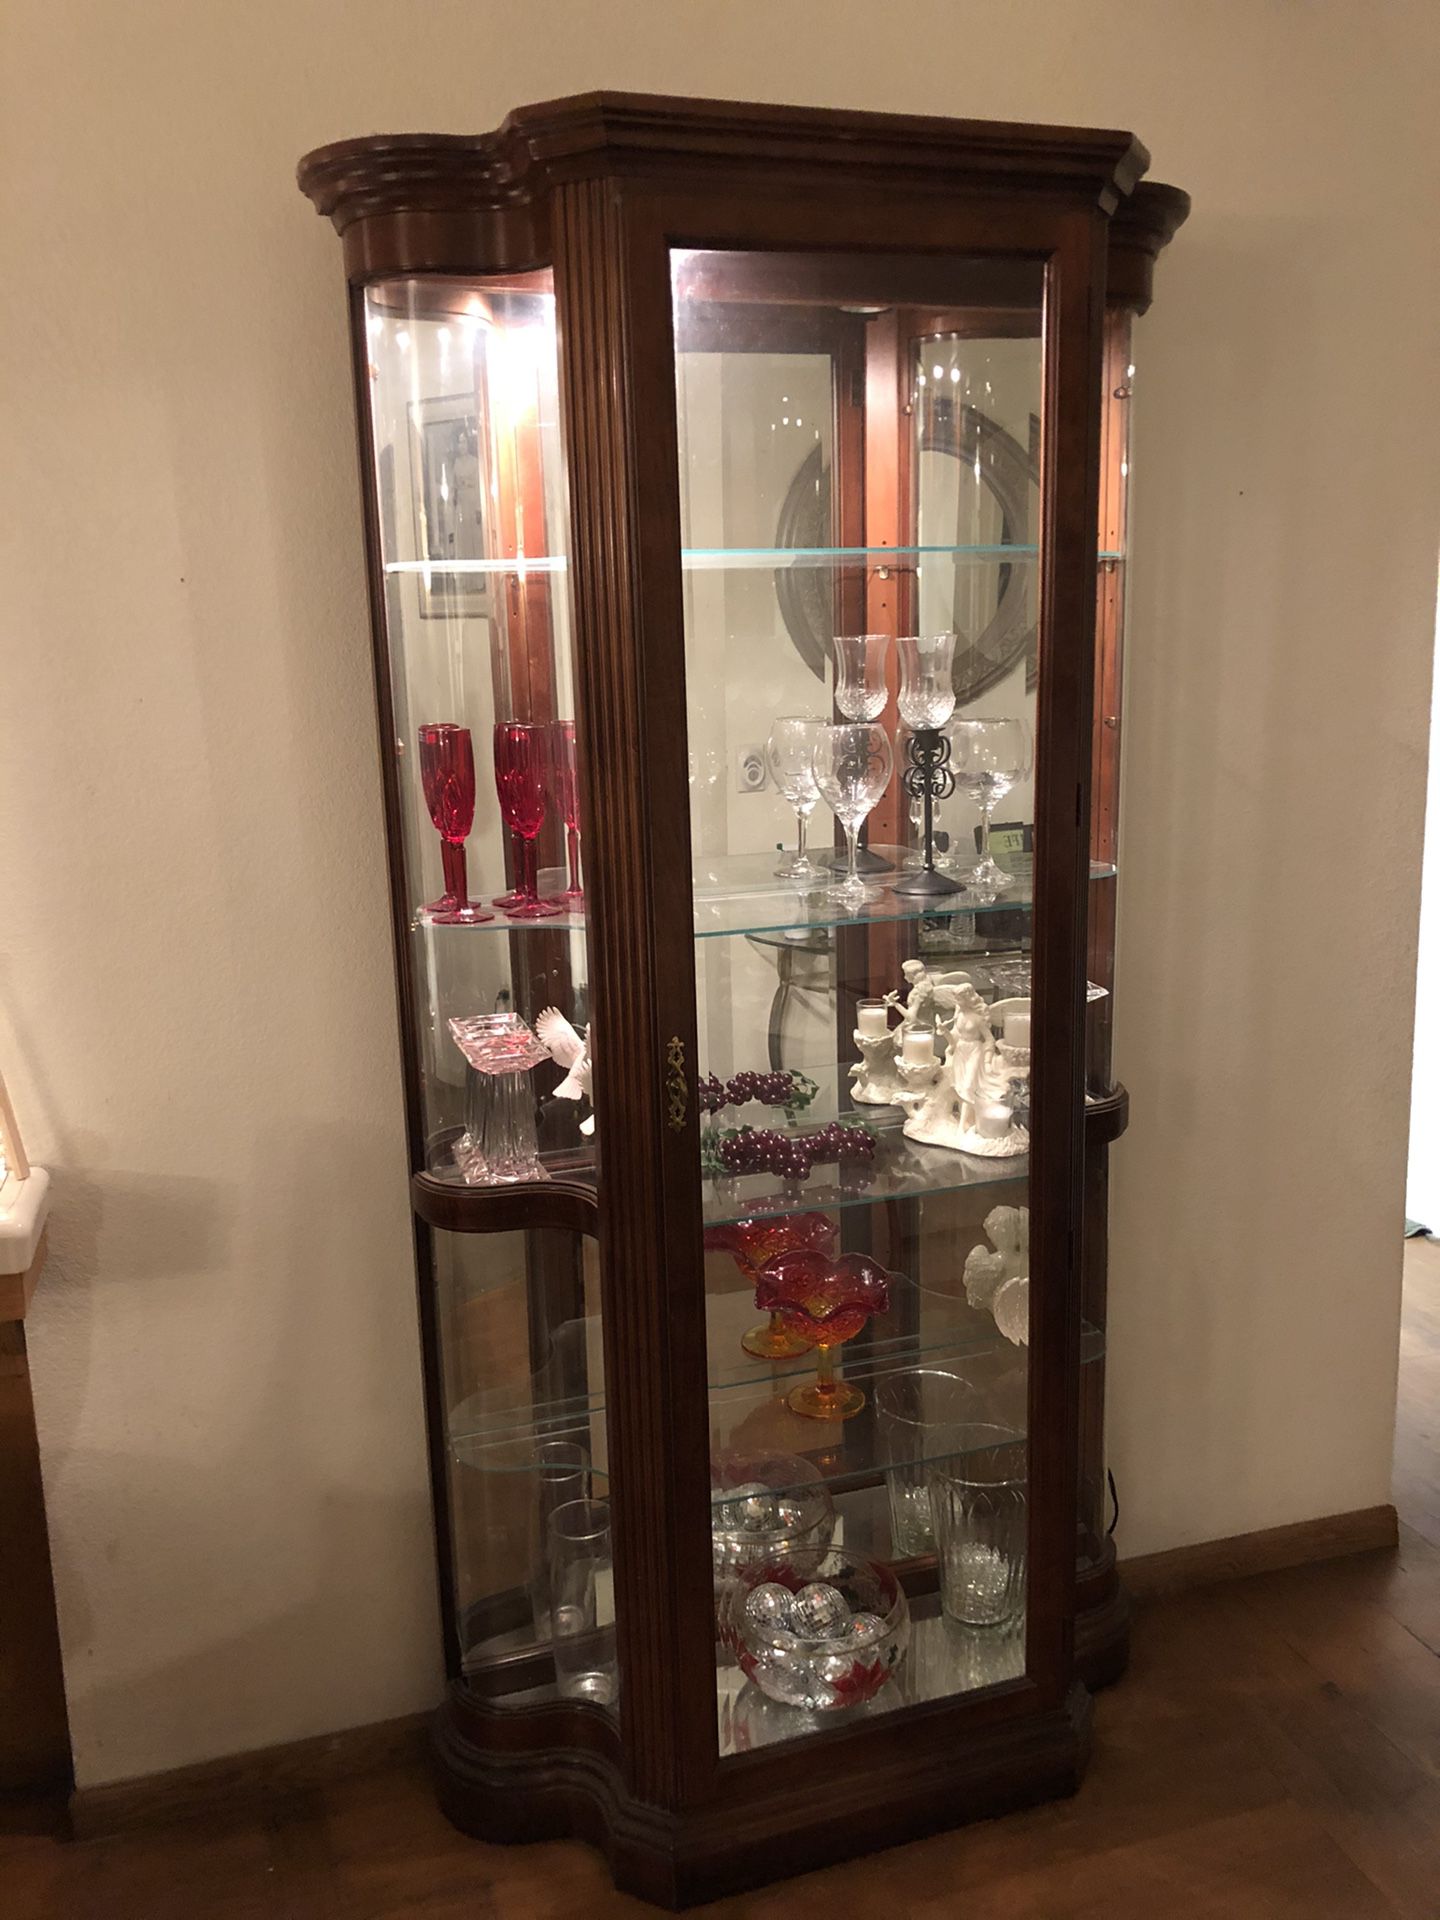 Nice cherry wood curio removable glass shelving mirror background with lighting inside